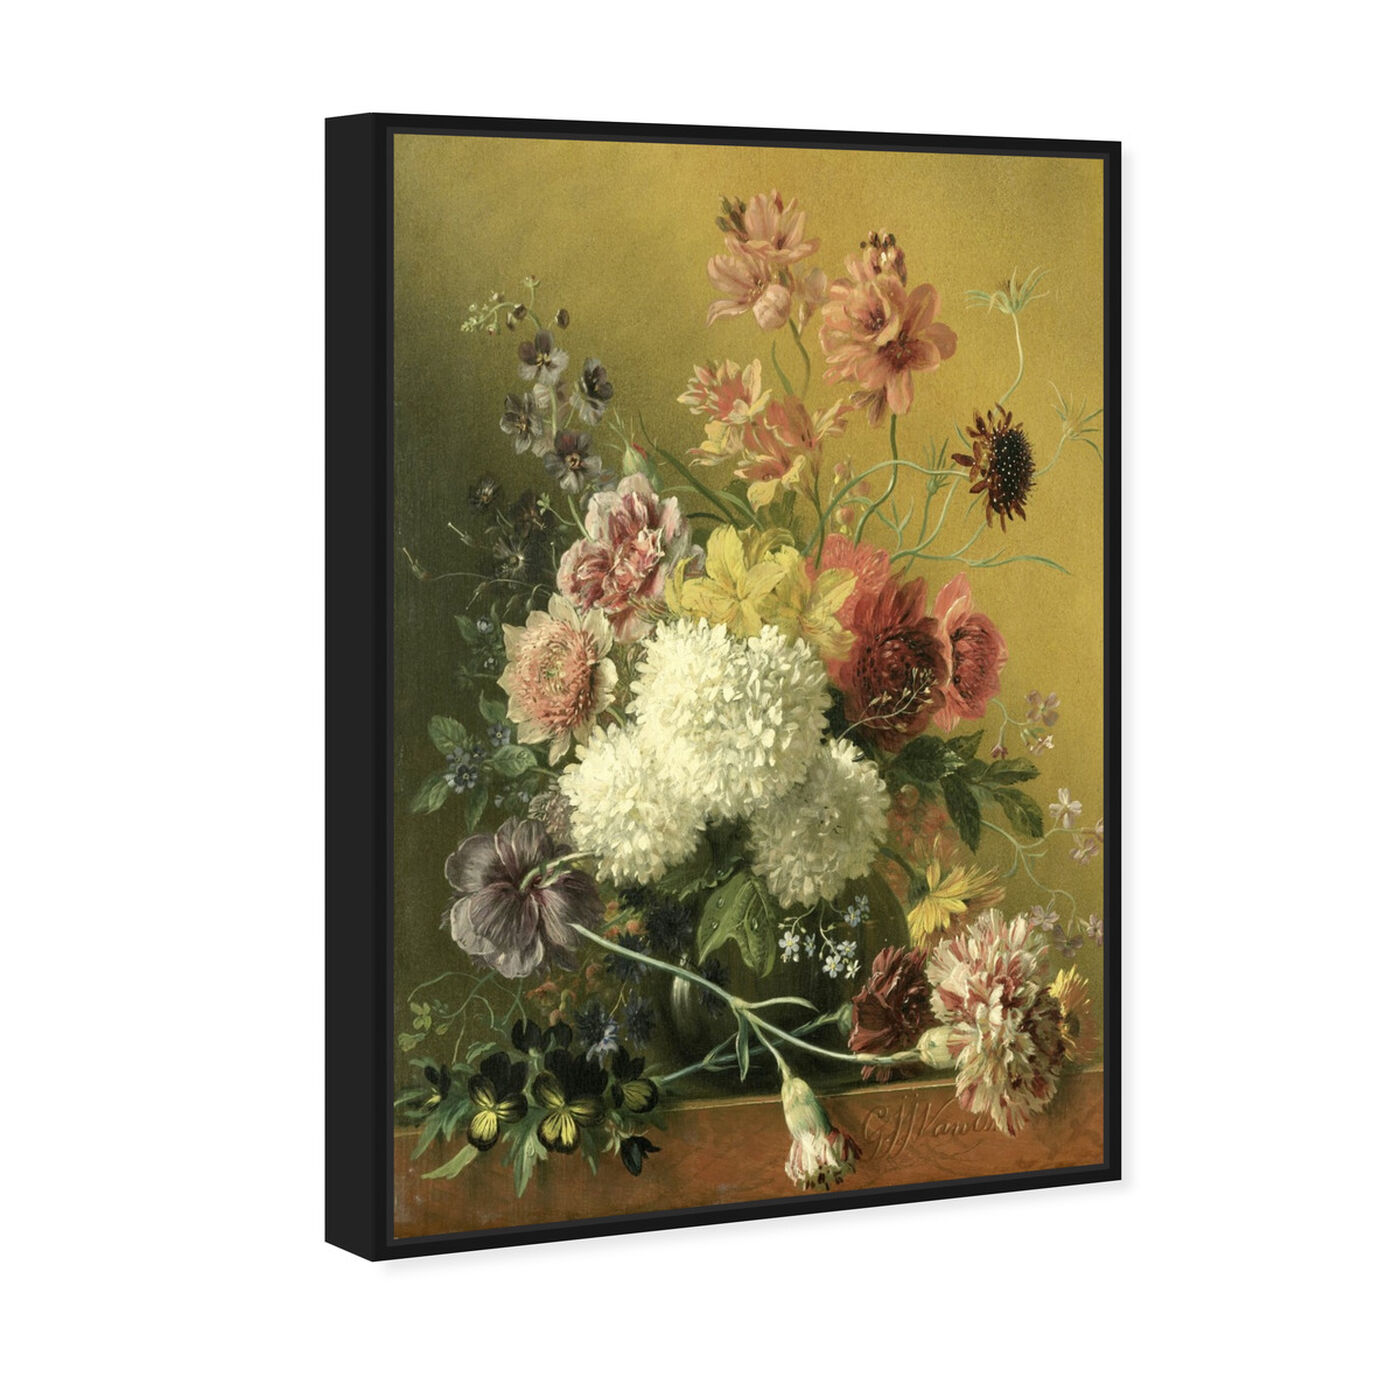 Angled view of Flower Arrangement - The Art Cabinet featuring classic and figurative and french décor art.